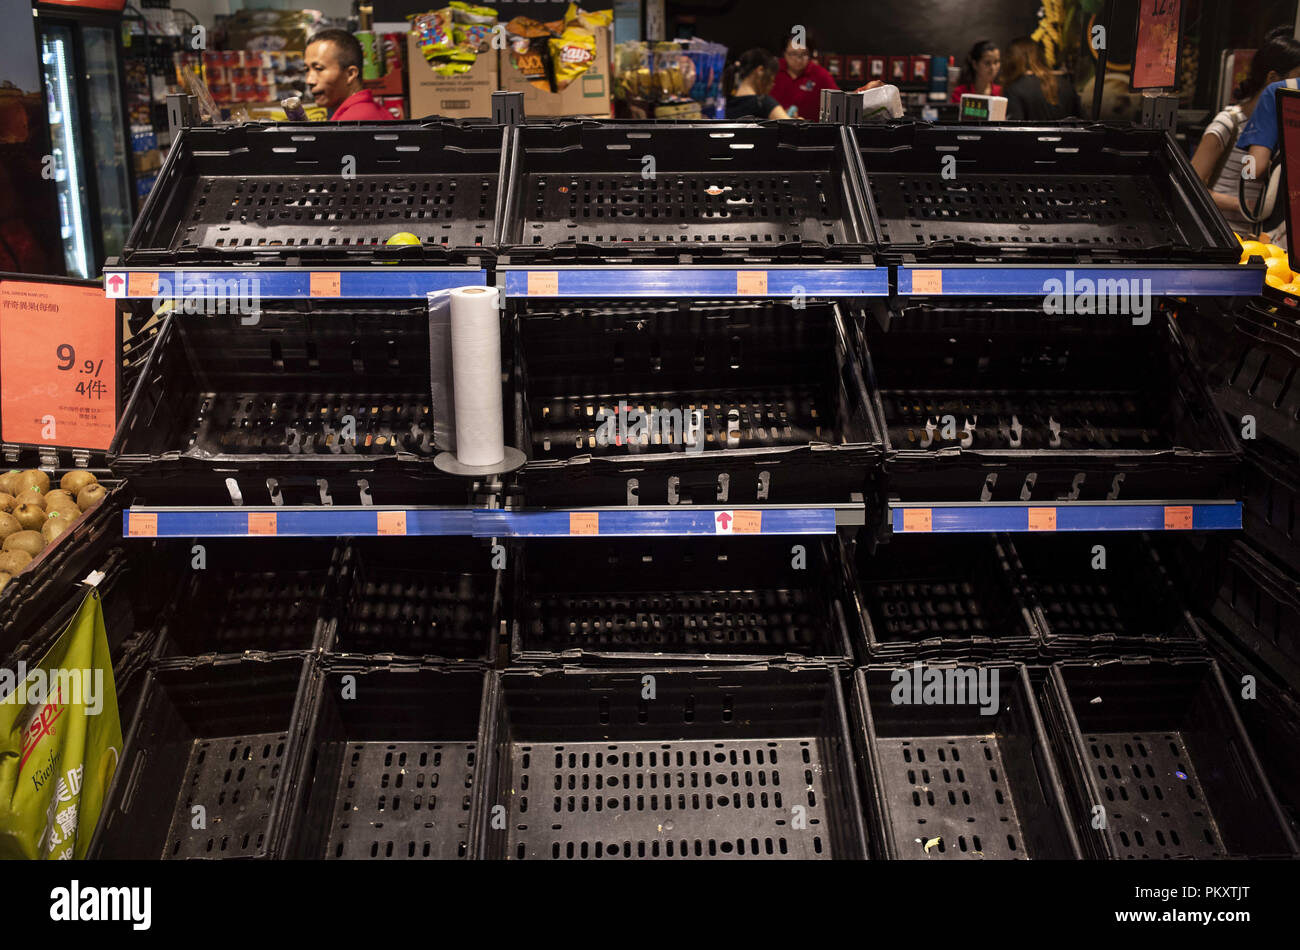 Hong Kong, Kowloon, Hong Kong. 15th Sep, 2018. Empty Supermarket shelves as residents stock up ahead of Super Typhoon Mangkhut arrival in Hong Kong, China. It is expected to land with a typhoon signal No. 8. Credit: Miguel Candela/SOPA Images/ZUMA Wire/Alamy Live News Stock Photo